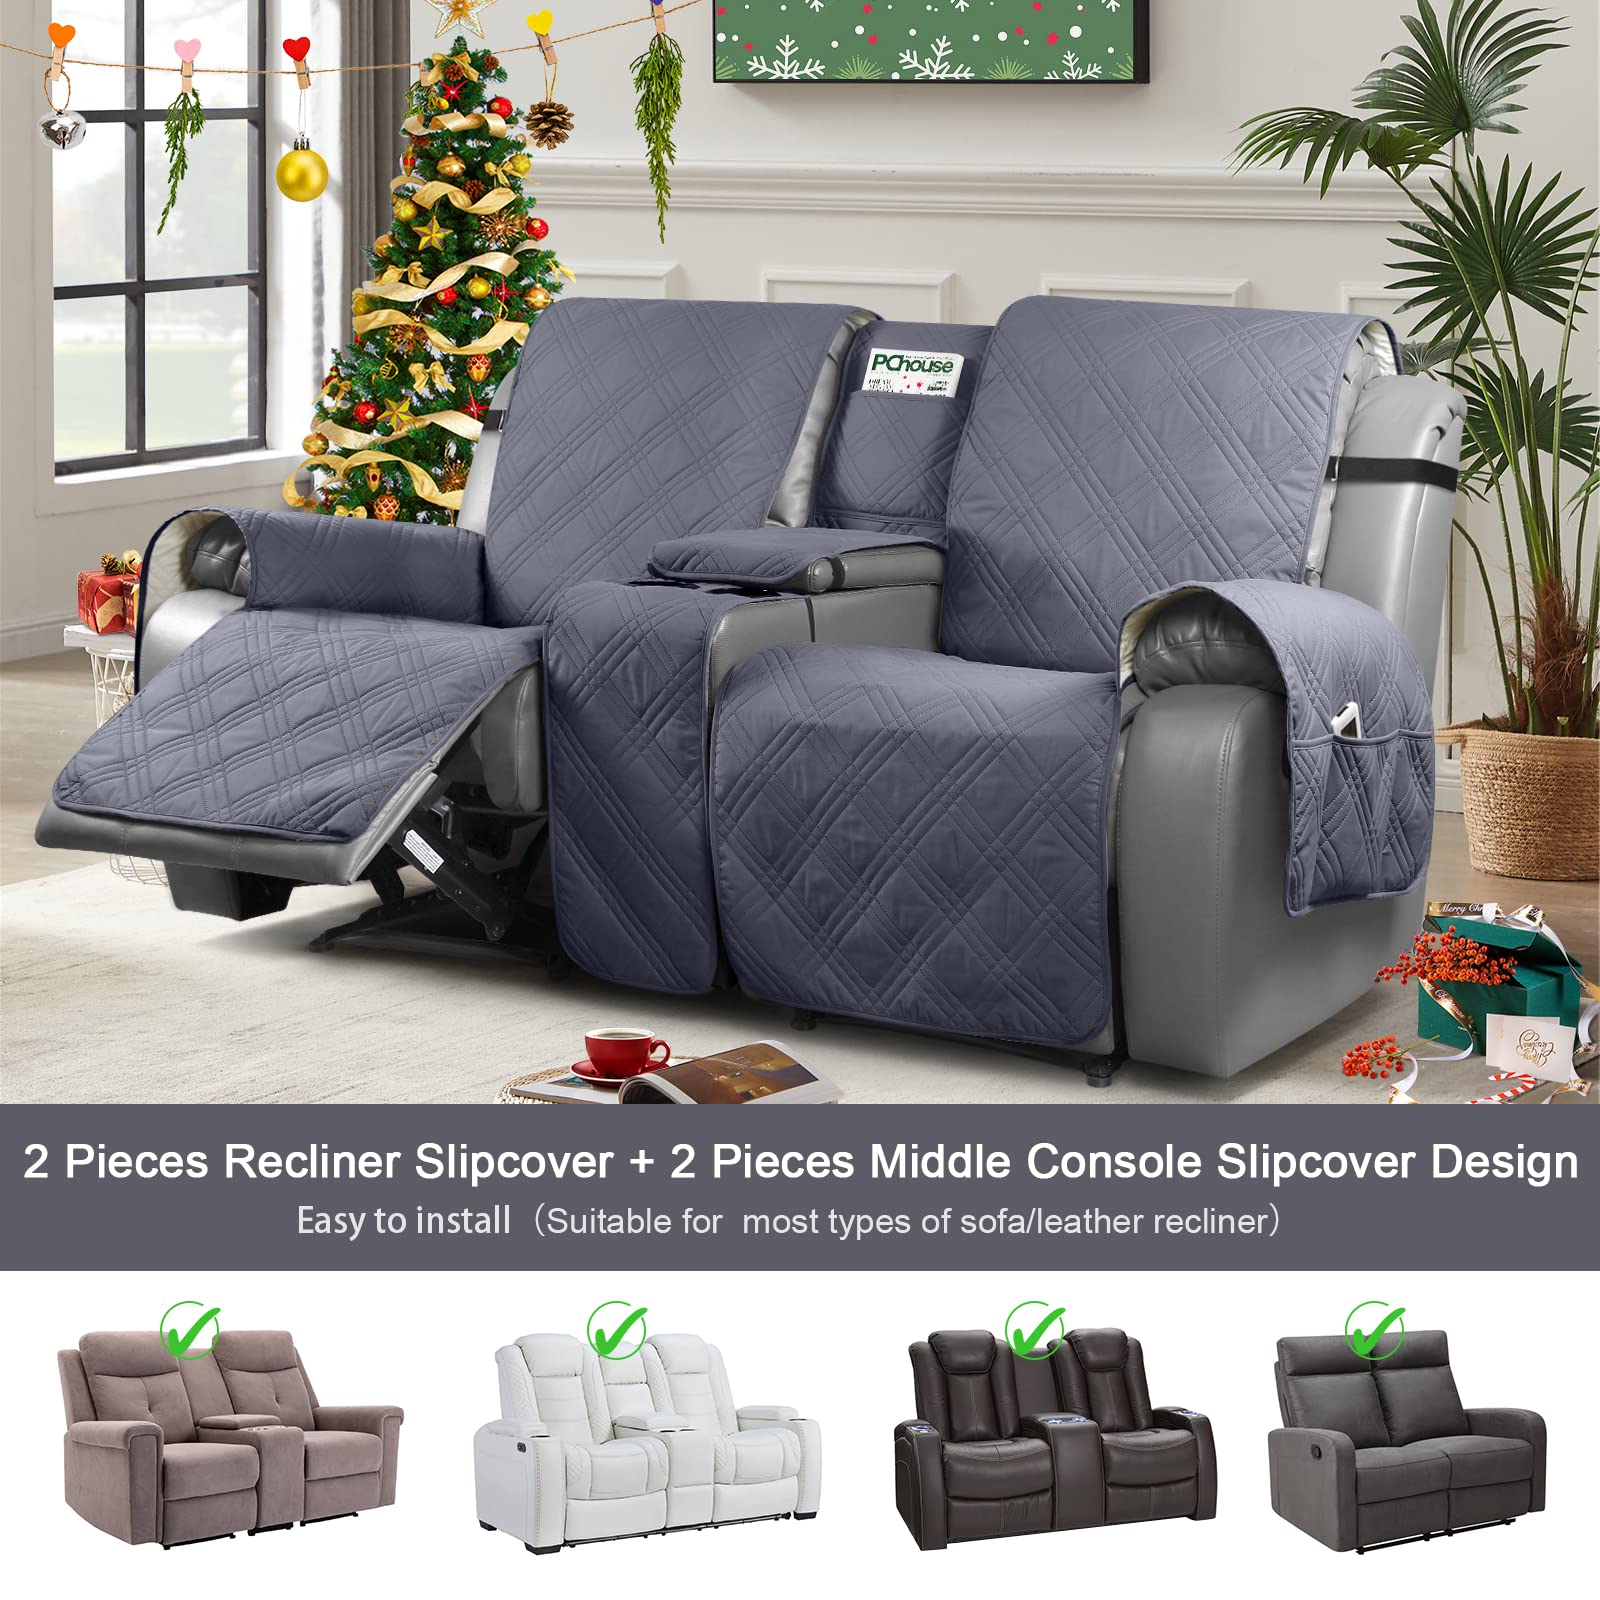 TAOcOcO Loveseat Recliner cover with console, Non-Slip Split Reclining Pet cover for Dual Loveseat Recliner, Furniture Protector